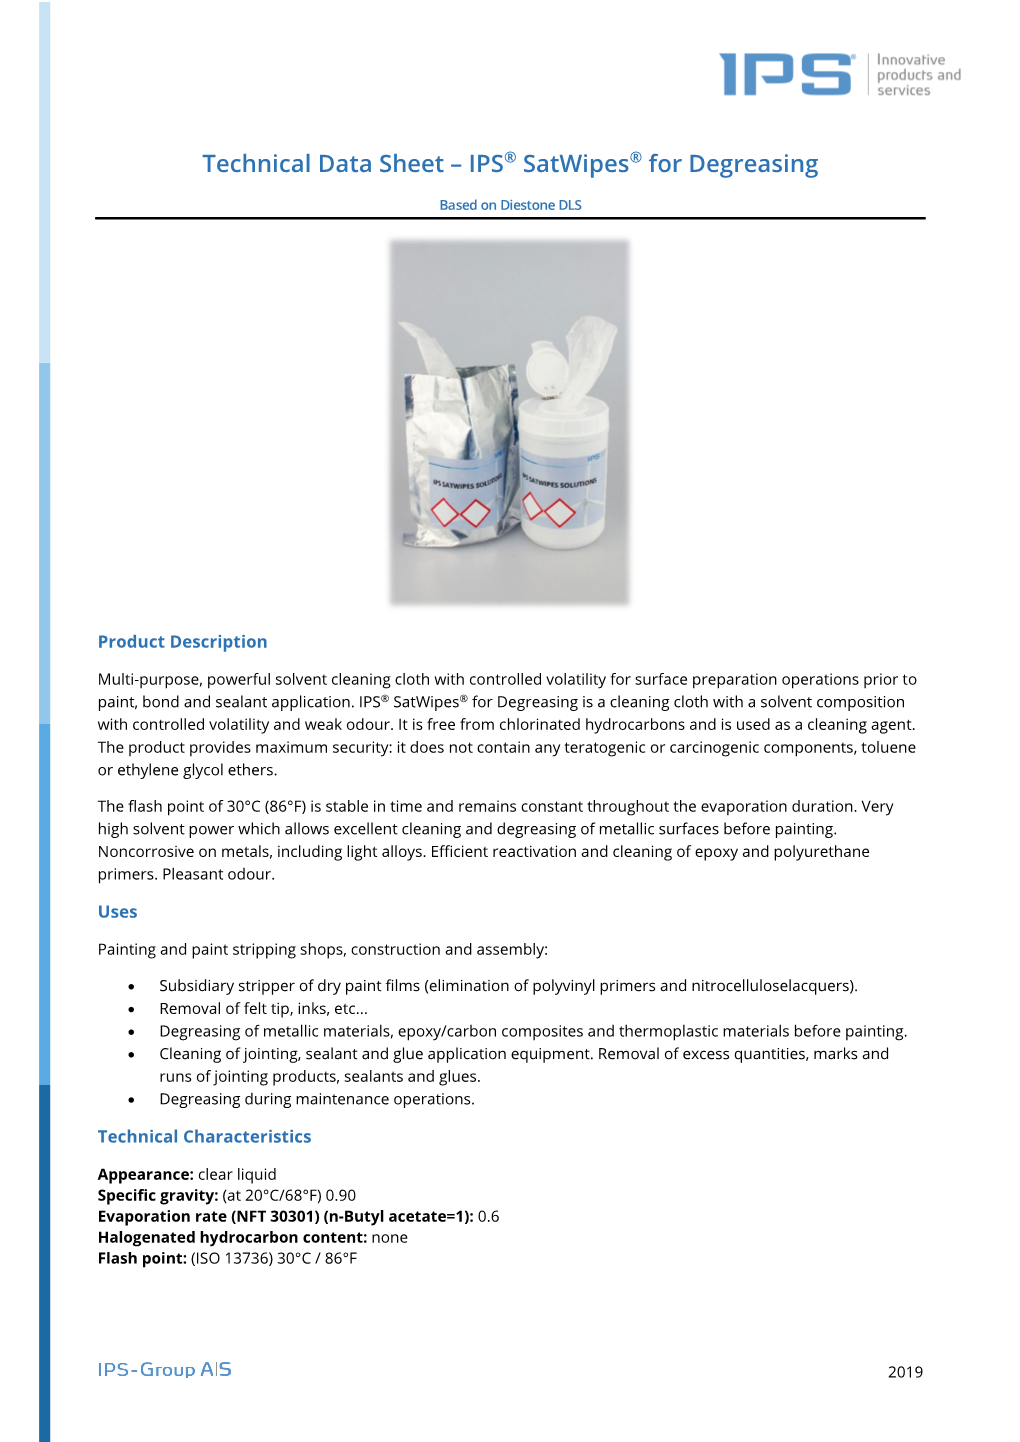 IPS® Satwipes® for Degreasing